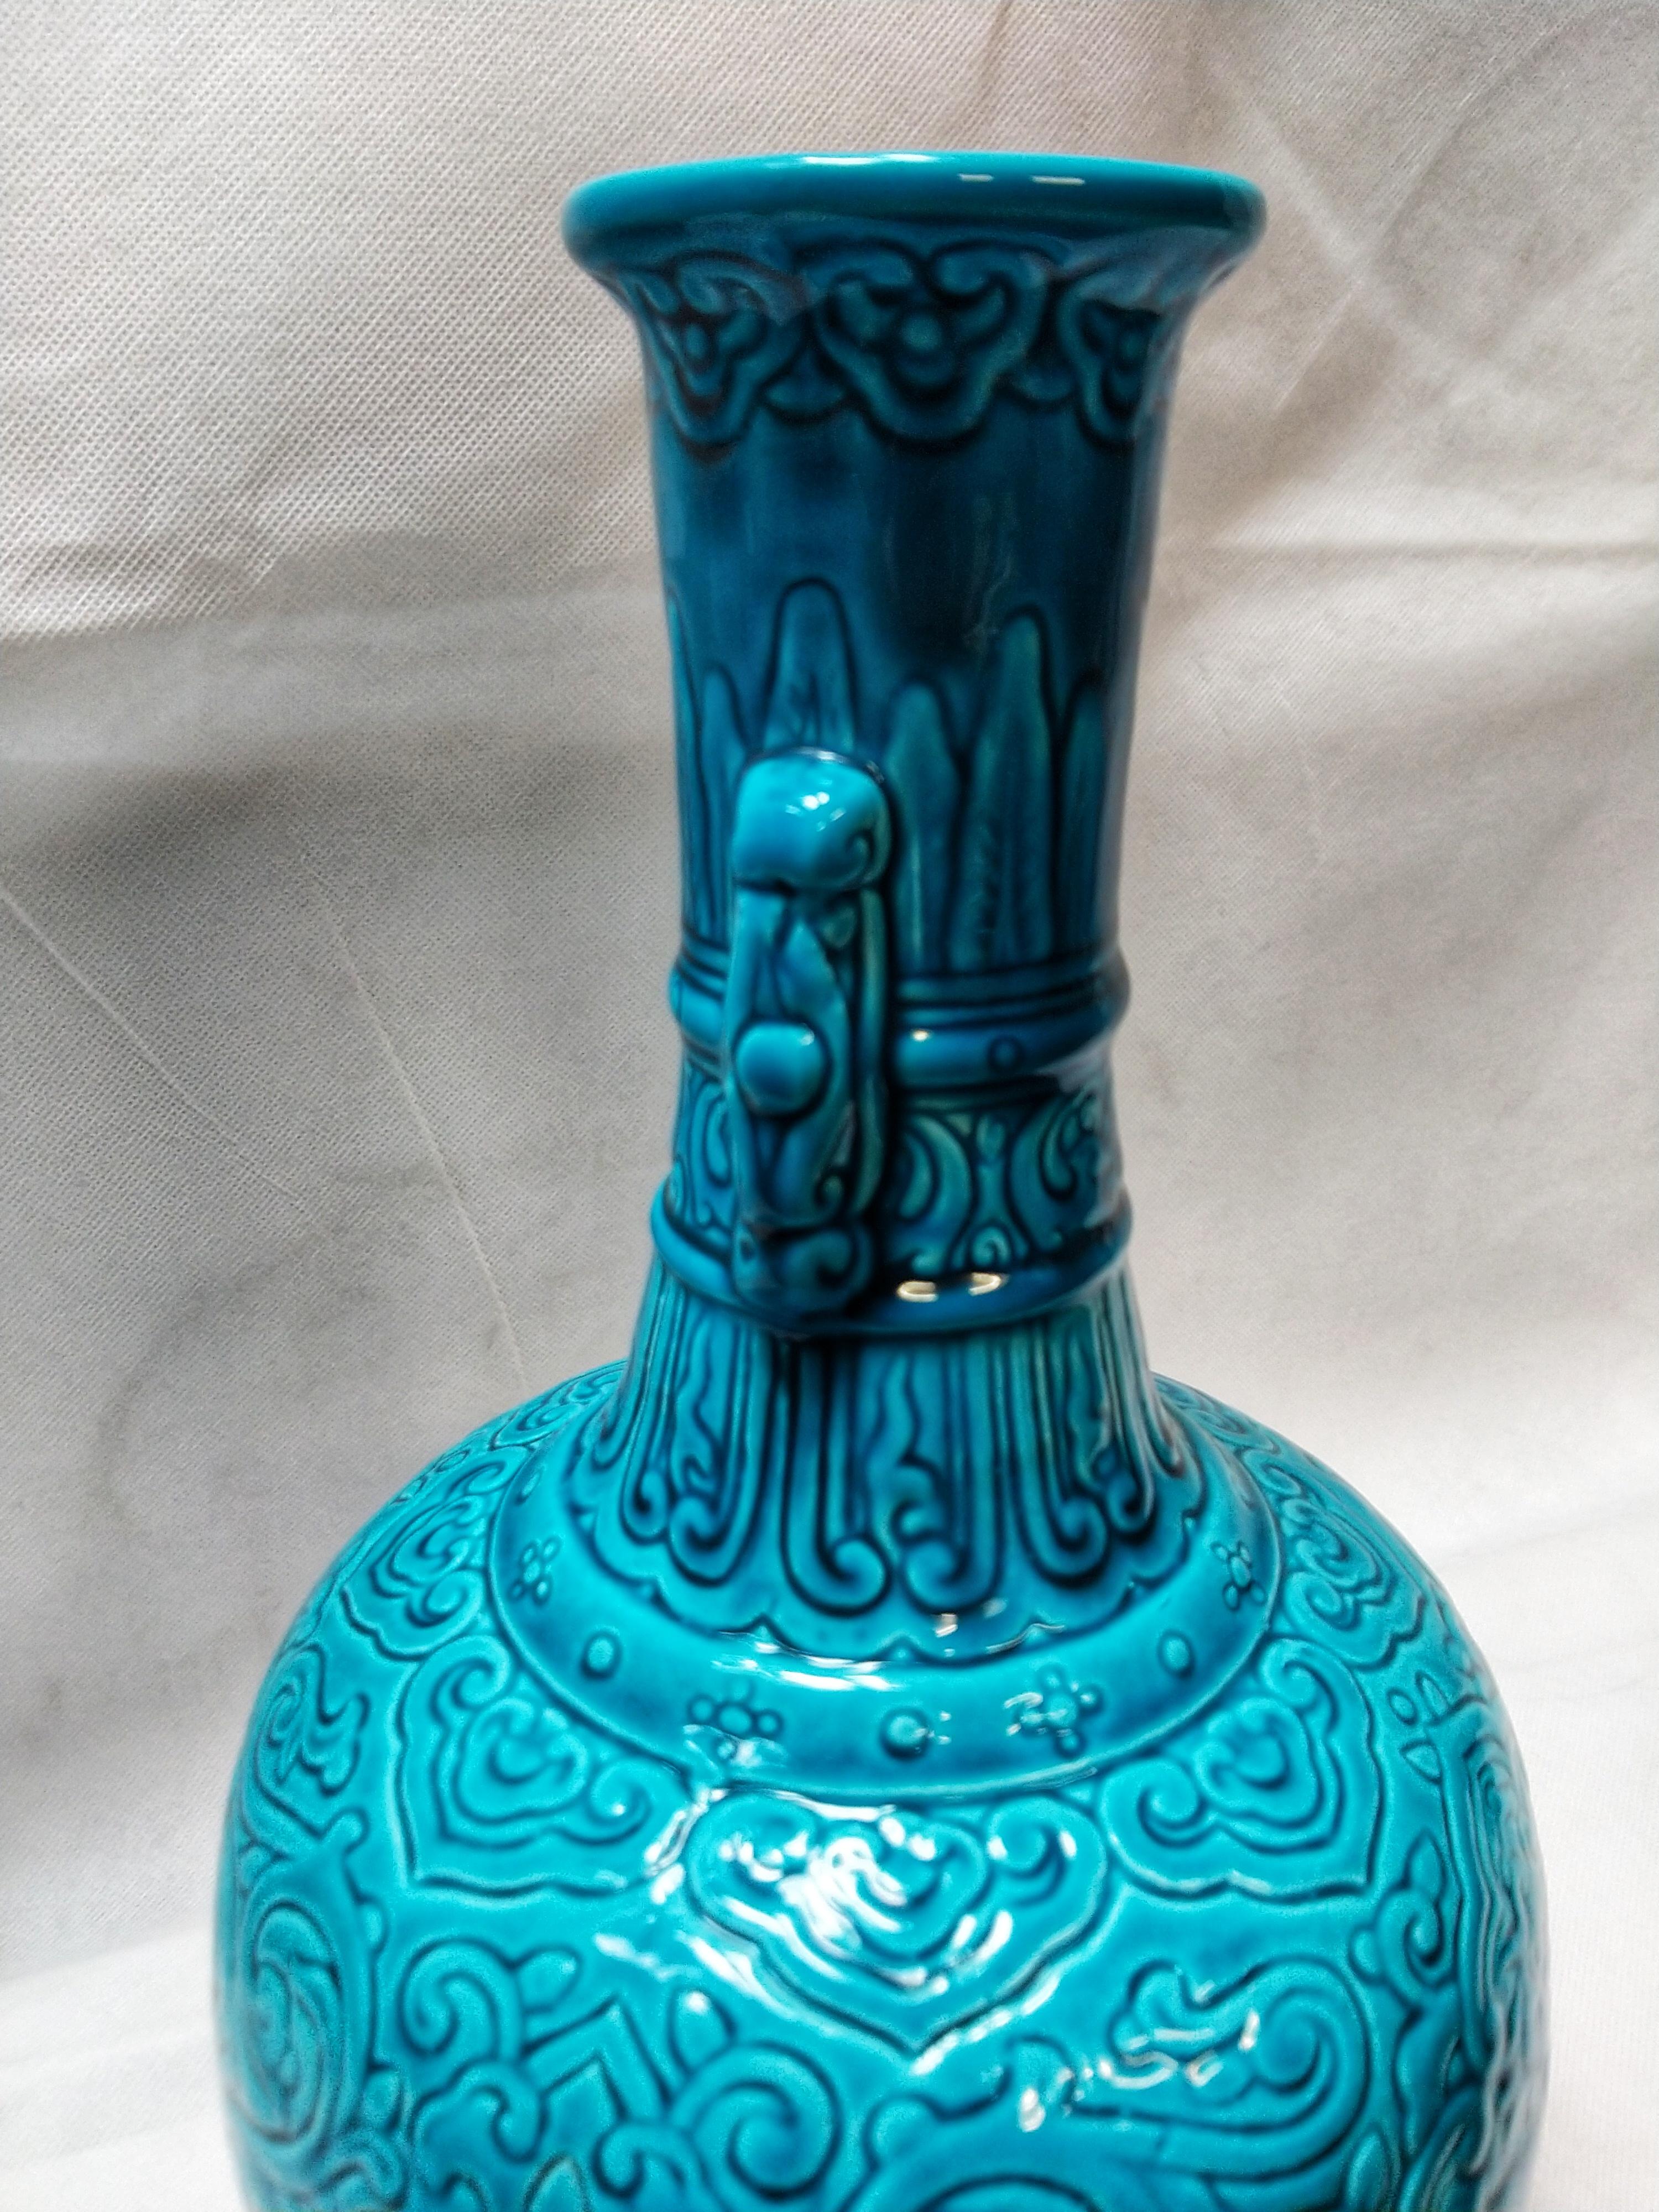 Beautiful French Sevres vase, early 20th century blue in oriental style by Paul Minet.

Paul Milet is a French ceramist, born January 25, 1870 in Sèvres and died after October 4, 1930.
Paul Milet is the son of ceramist Felix Optat Milet (1838-1911).